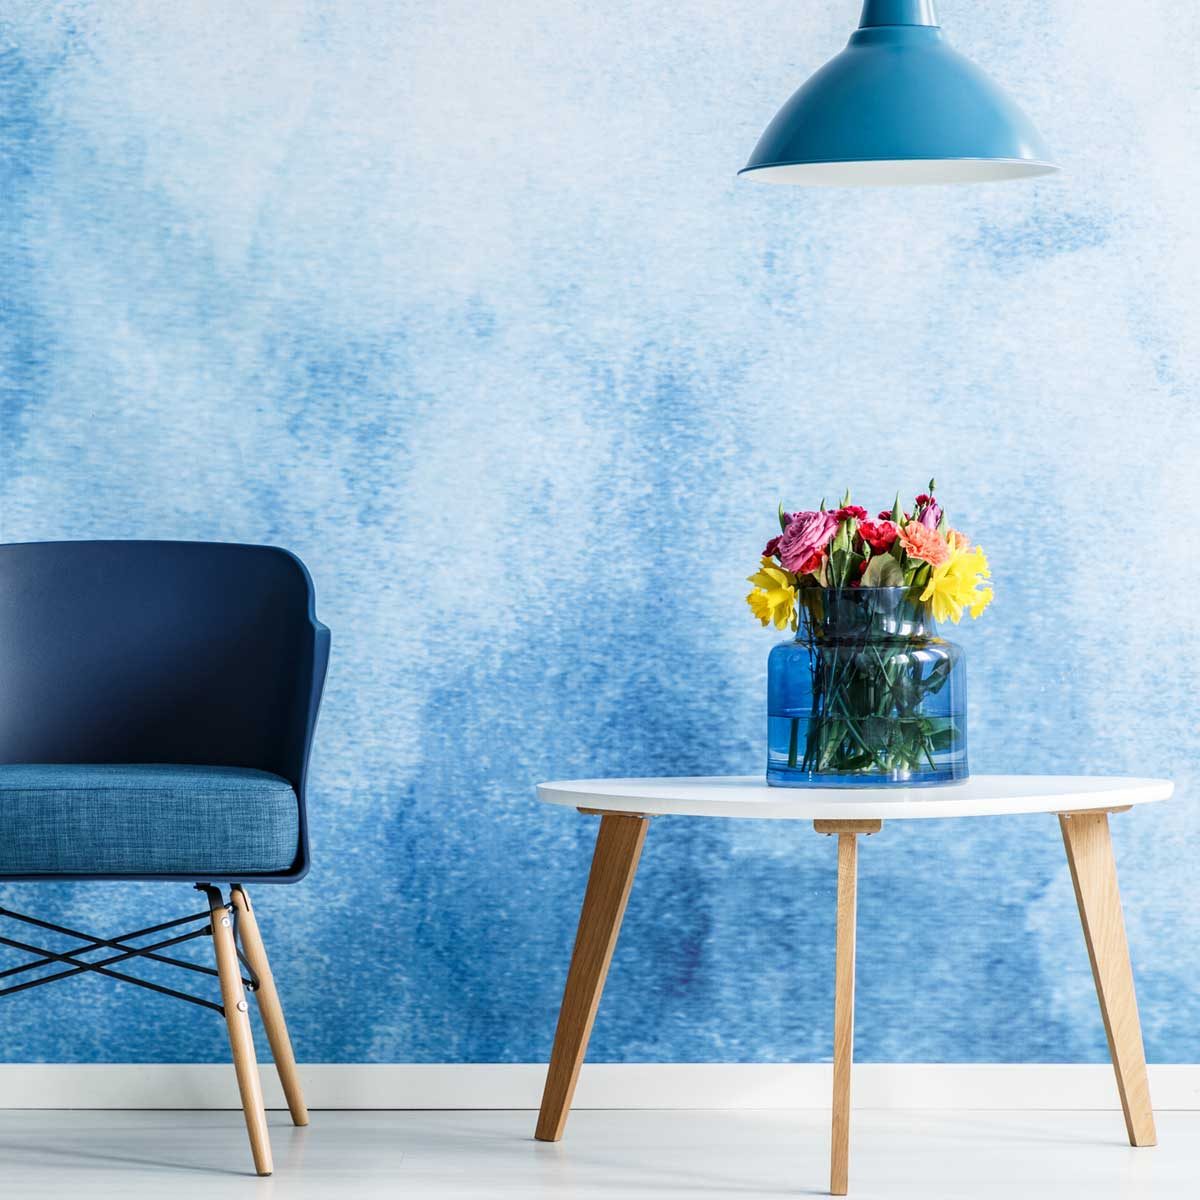 10 Wall Painting Ideas You'll Want to Add to Your Home | Family ...